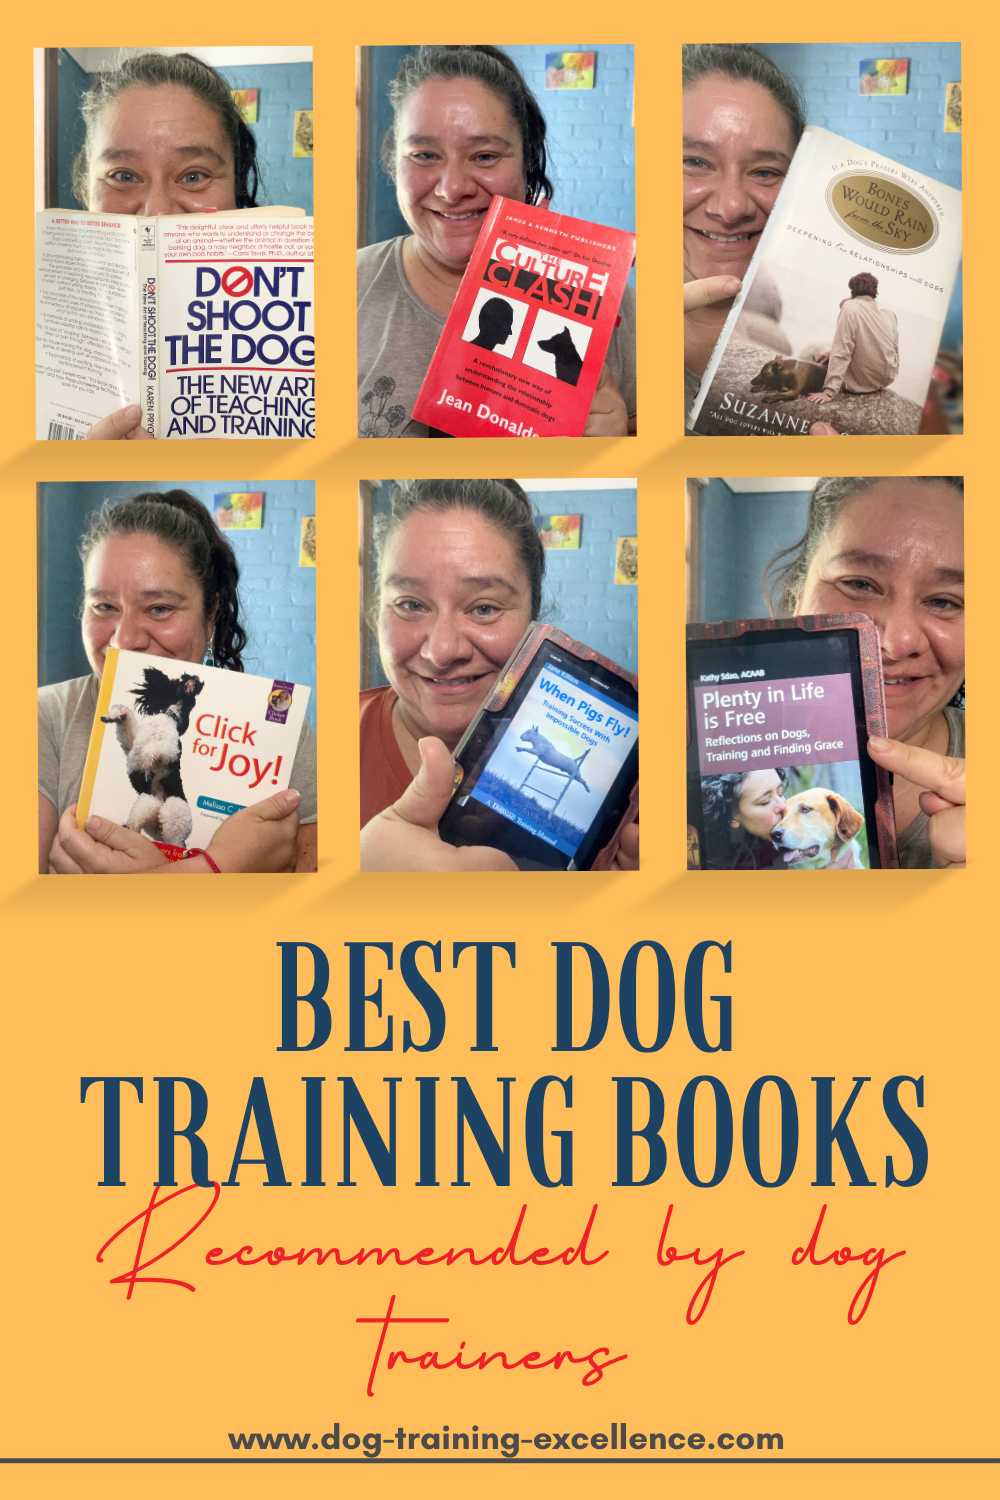 Best dog training books recommended by dog trainers, dog books, puppy books